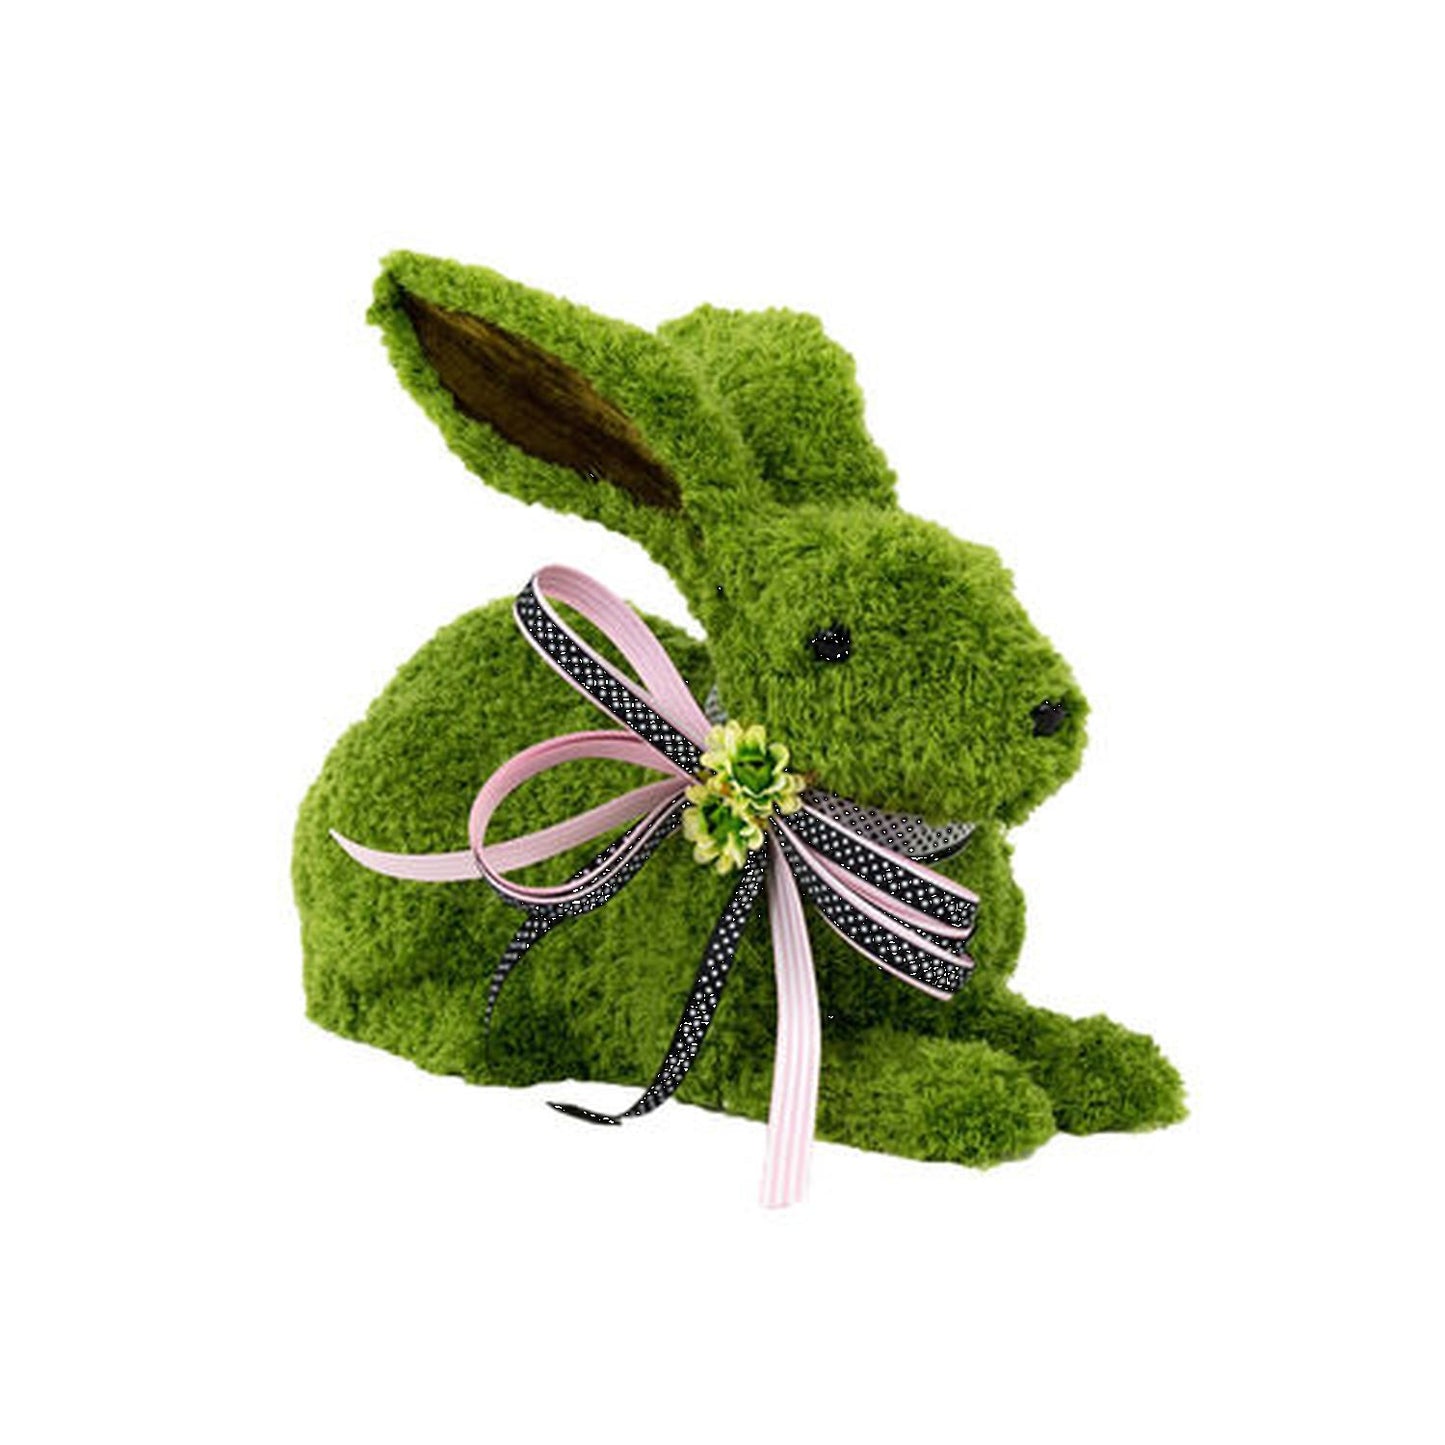 December Diamonds Green Garden Bunny Laying With Pink Ribbon Figurine